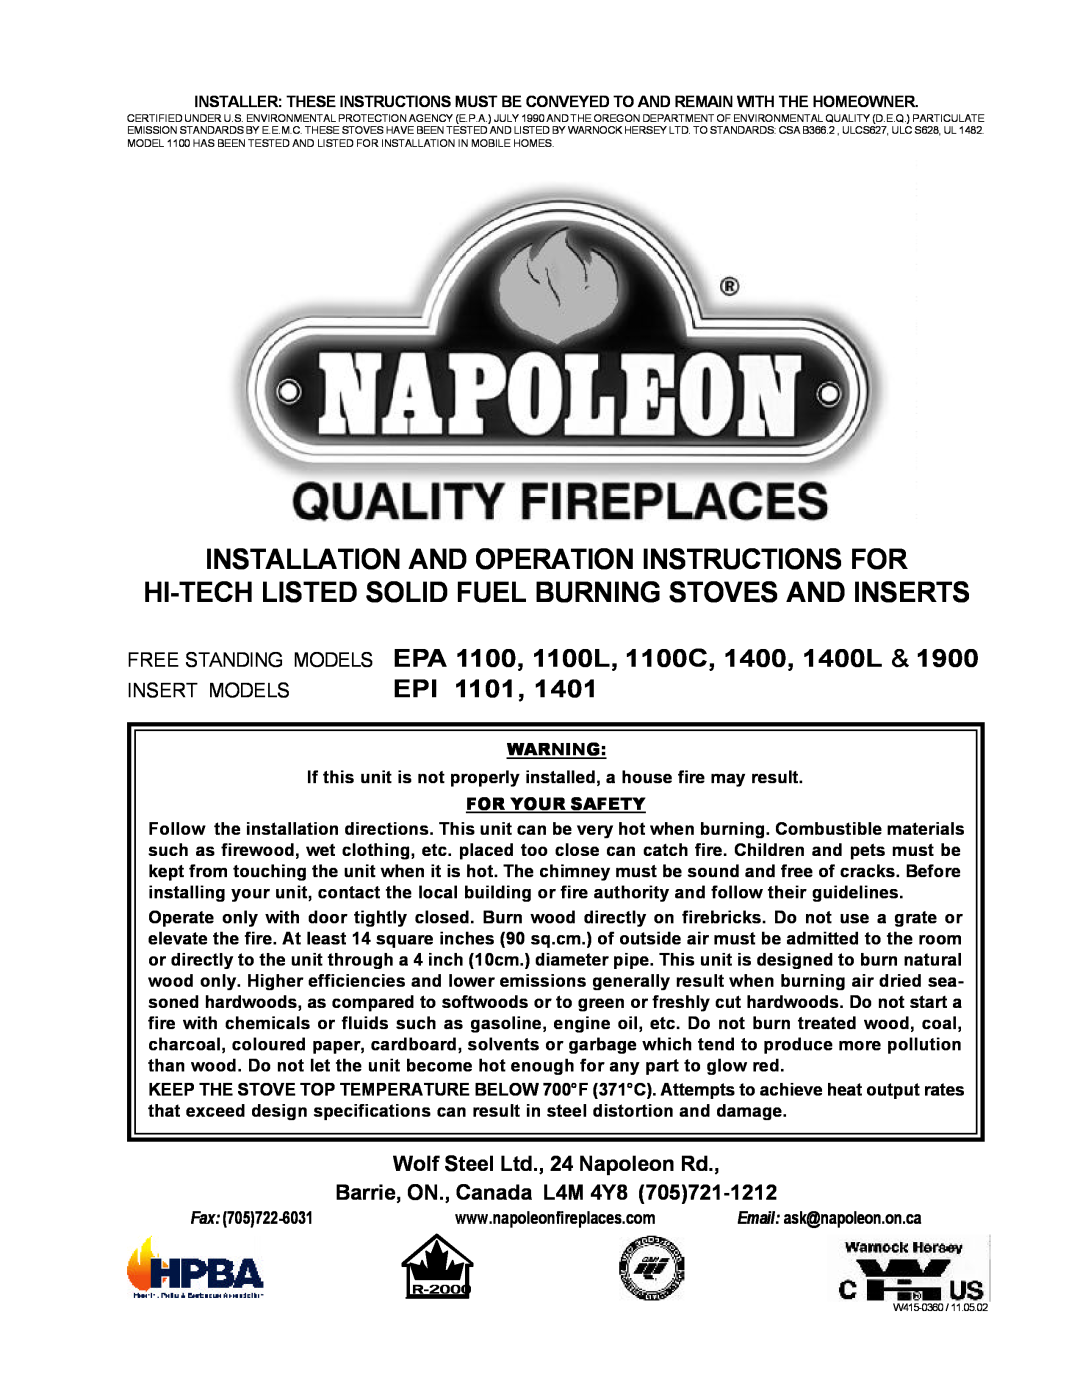 Napoleon Fireplaces EPA 1100C specifications EPA 1100, 1100L, 1100C, 1400, 1400L & EPI, Barrie, ON., Canada L4M 4Y8, Fax 